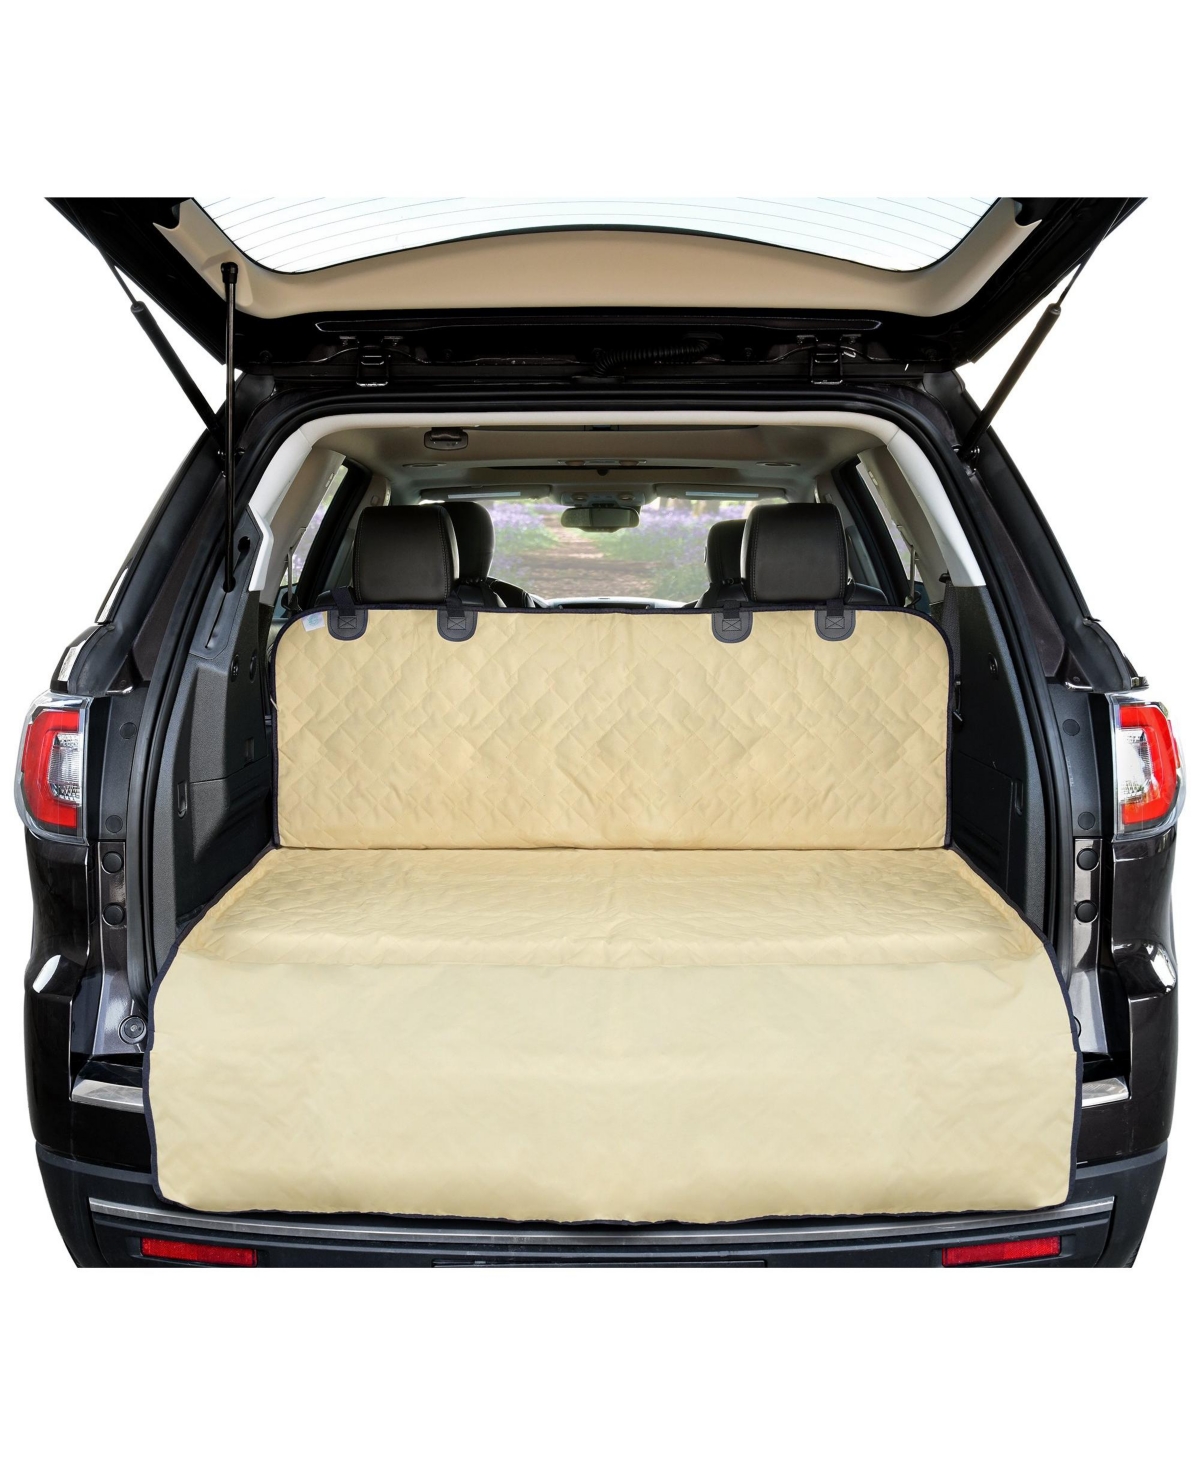 Cargo Liner, Seat Cover for Dogs, Waterproof Dog Seat Cover - Beige